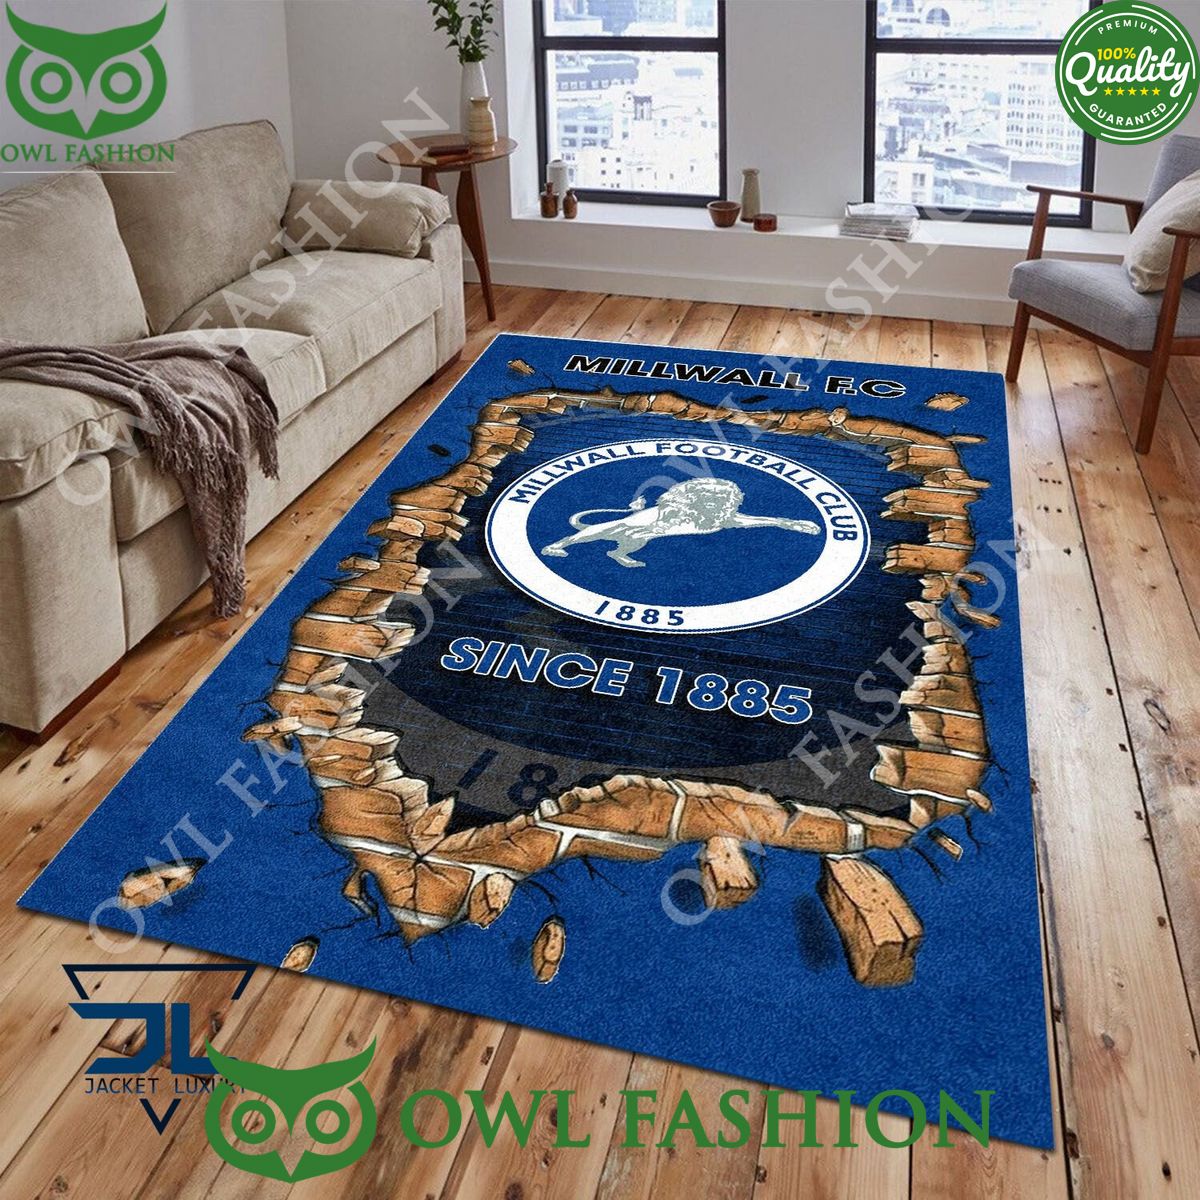 Football Millwall F.C 1805 EPL Living Room Rug Carpet Handsome as usual